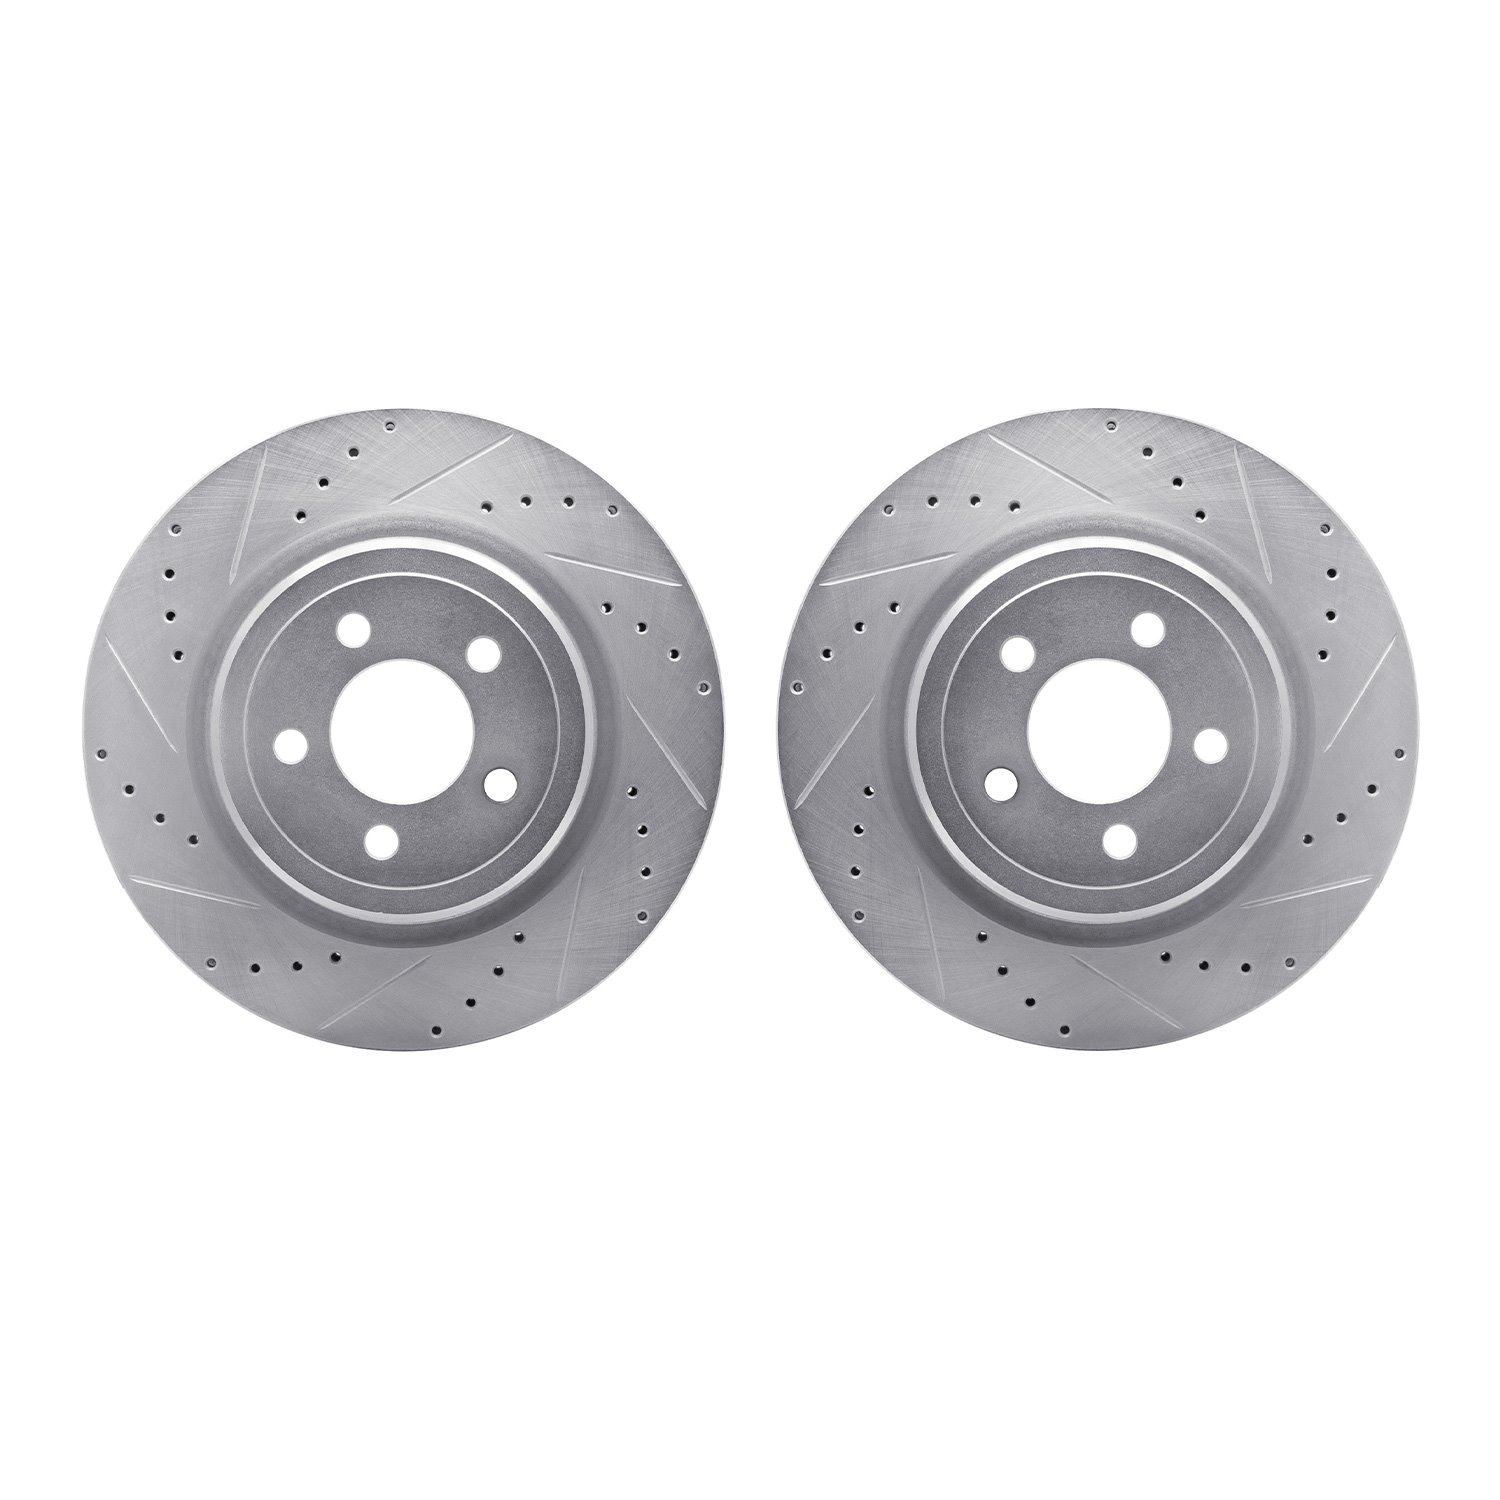 7002-39030 Drilled/Slotted Brake Rotors [Silver], Fits Select Mopar, Position: Rear